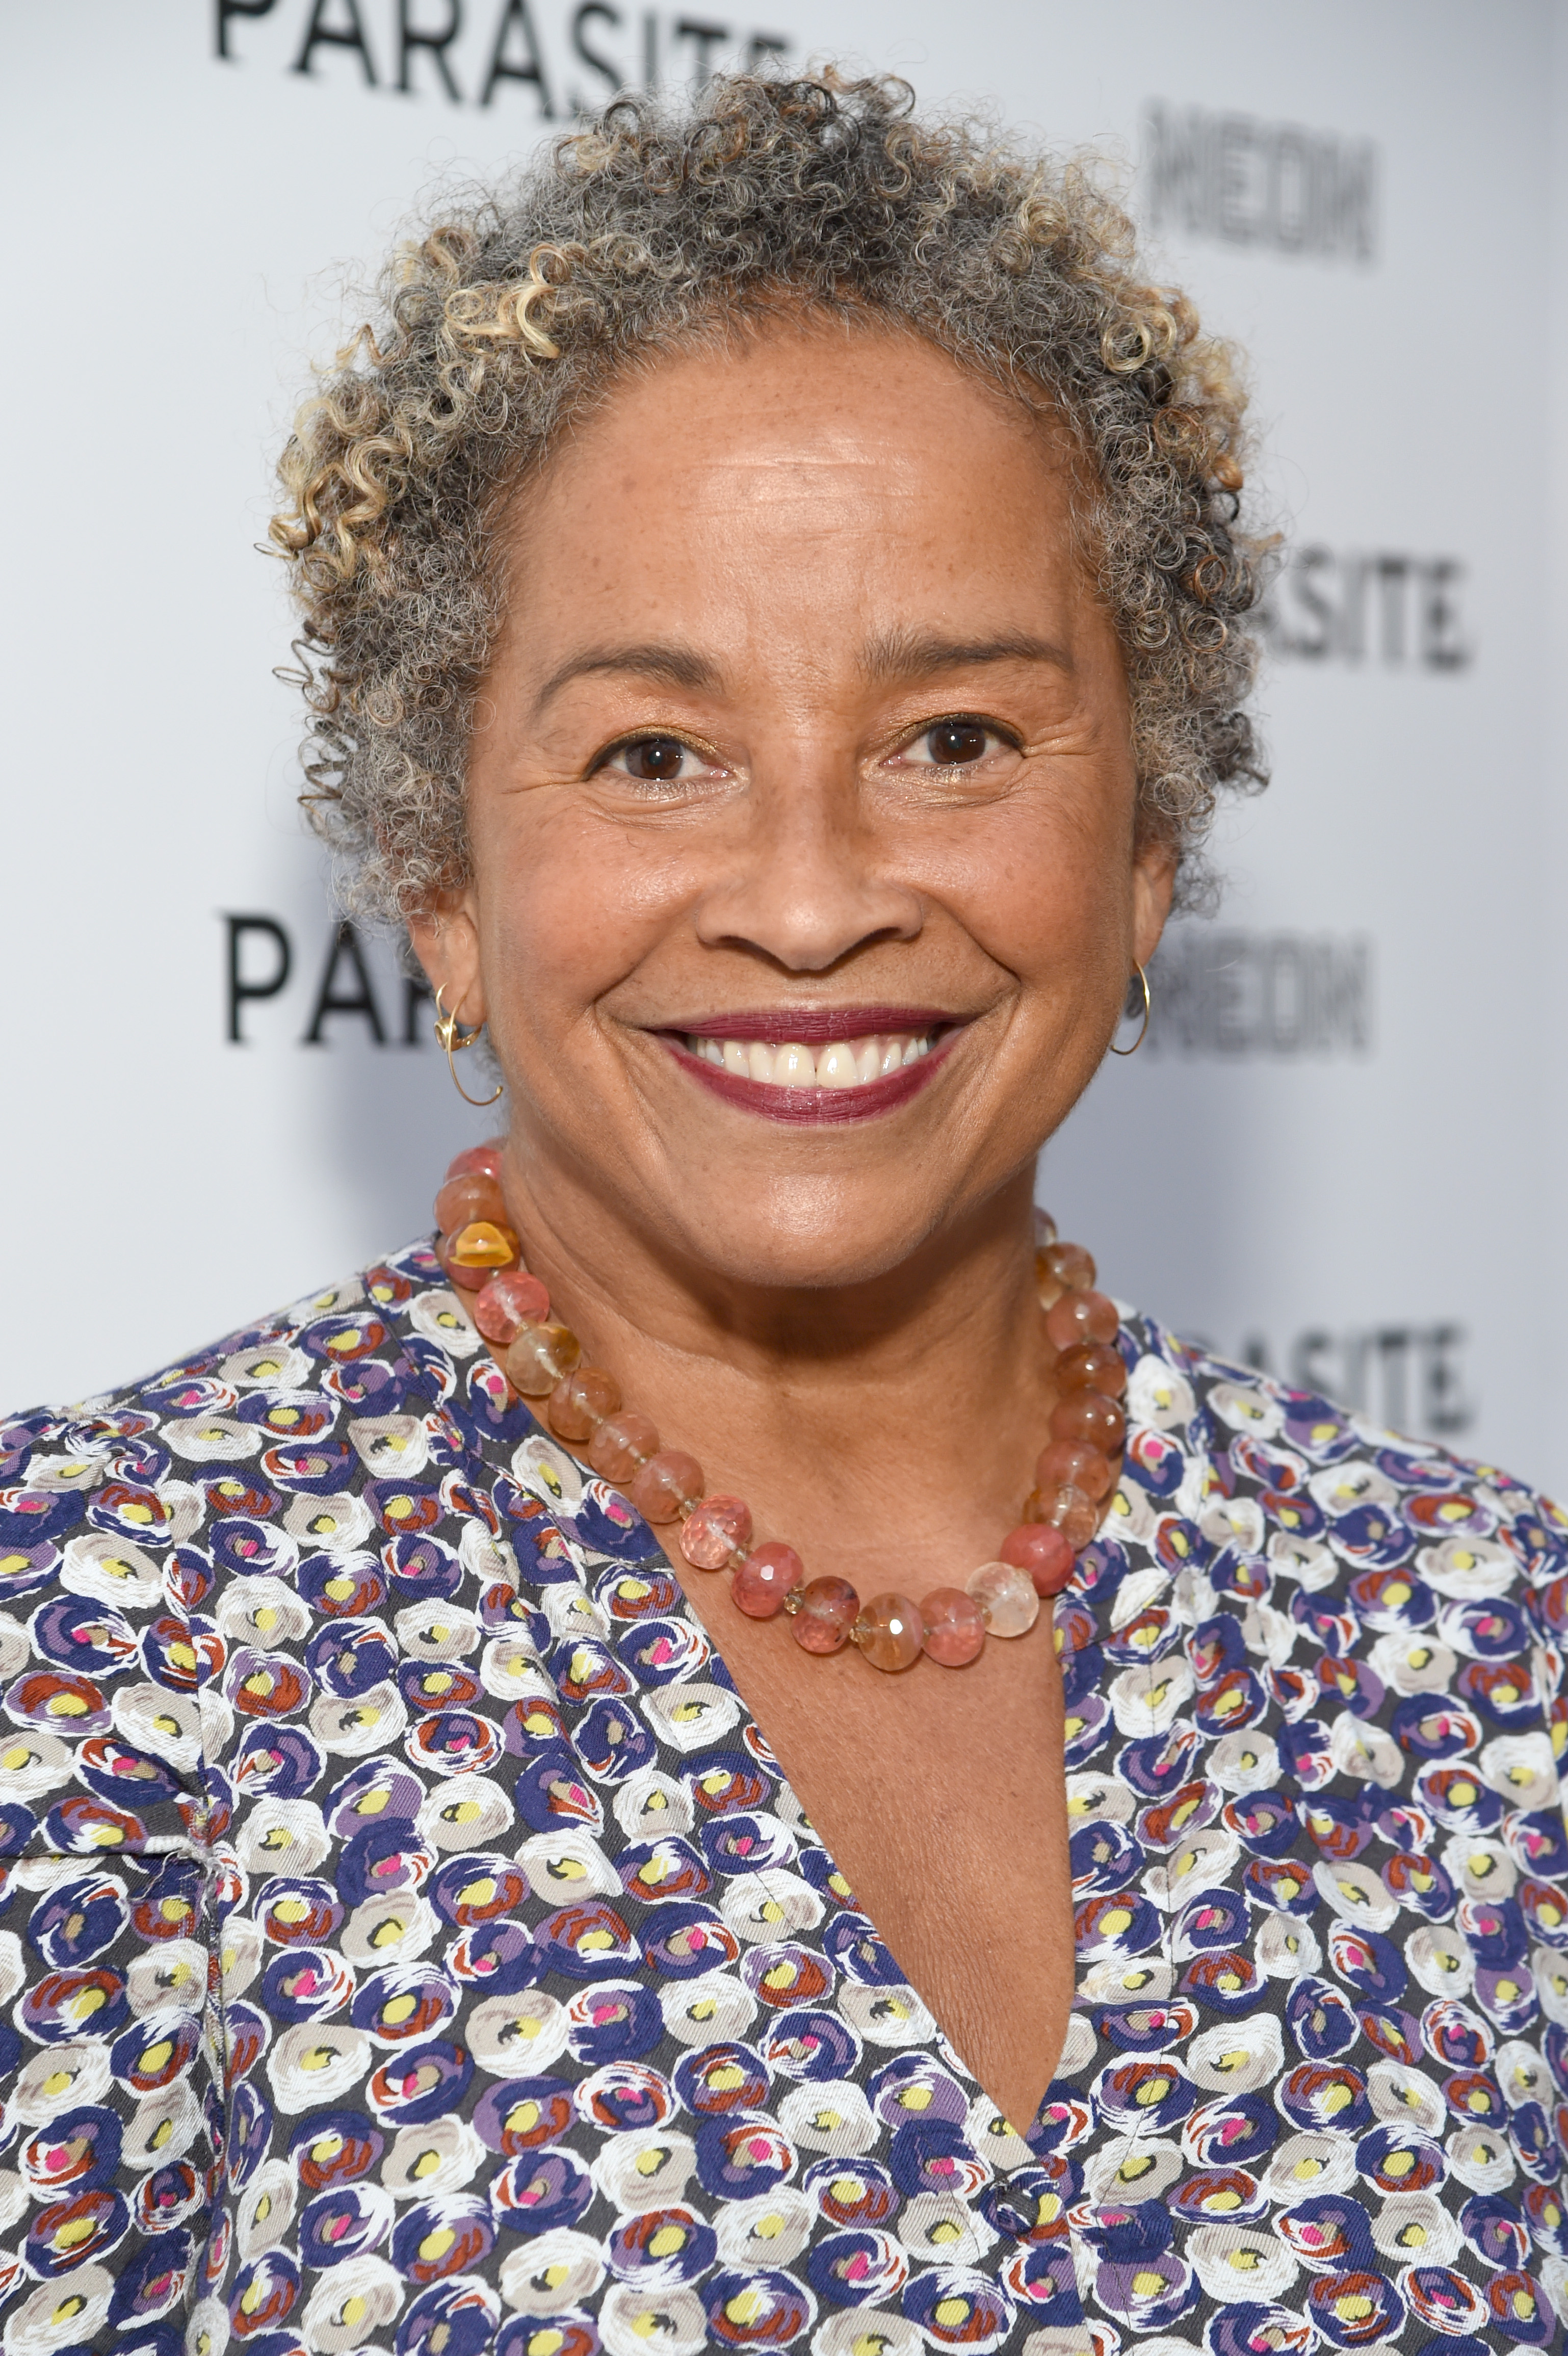 Rae Dawn Chong at the premiere of "Parasite" on October 2, 2019 in Hollywood, California | Source: Getty Images